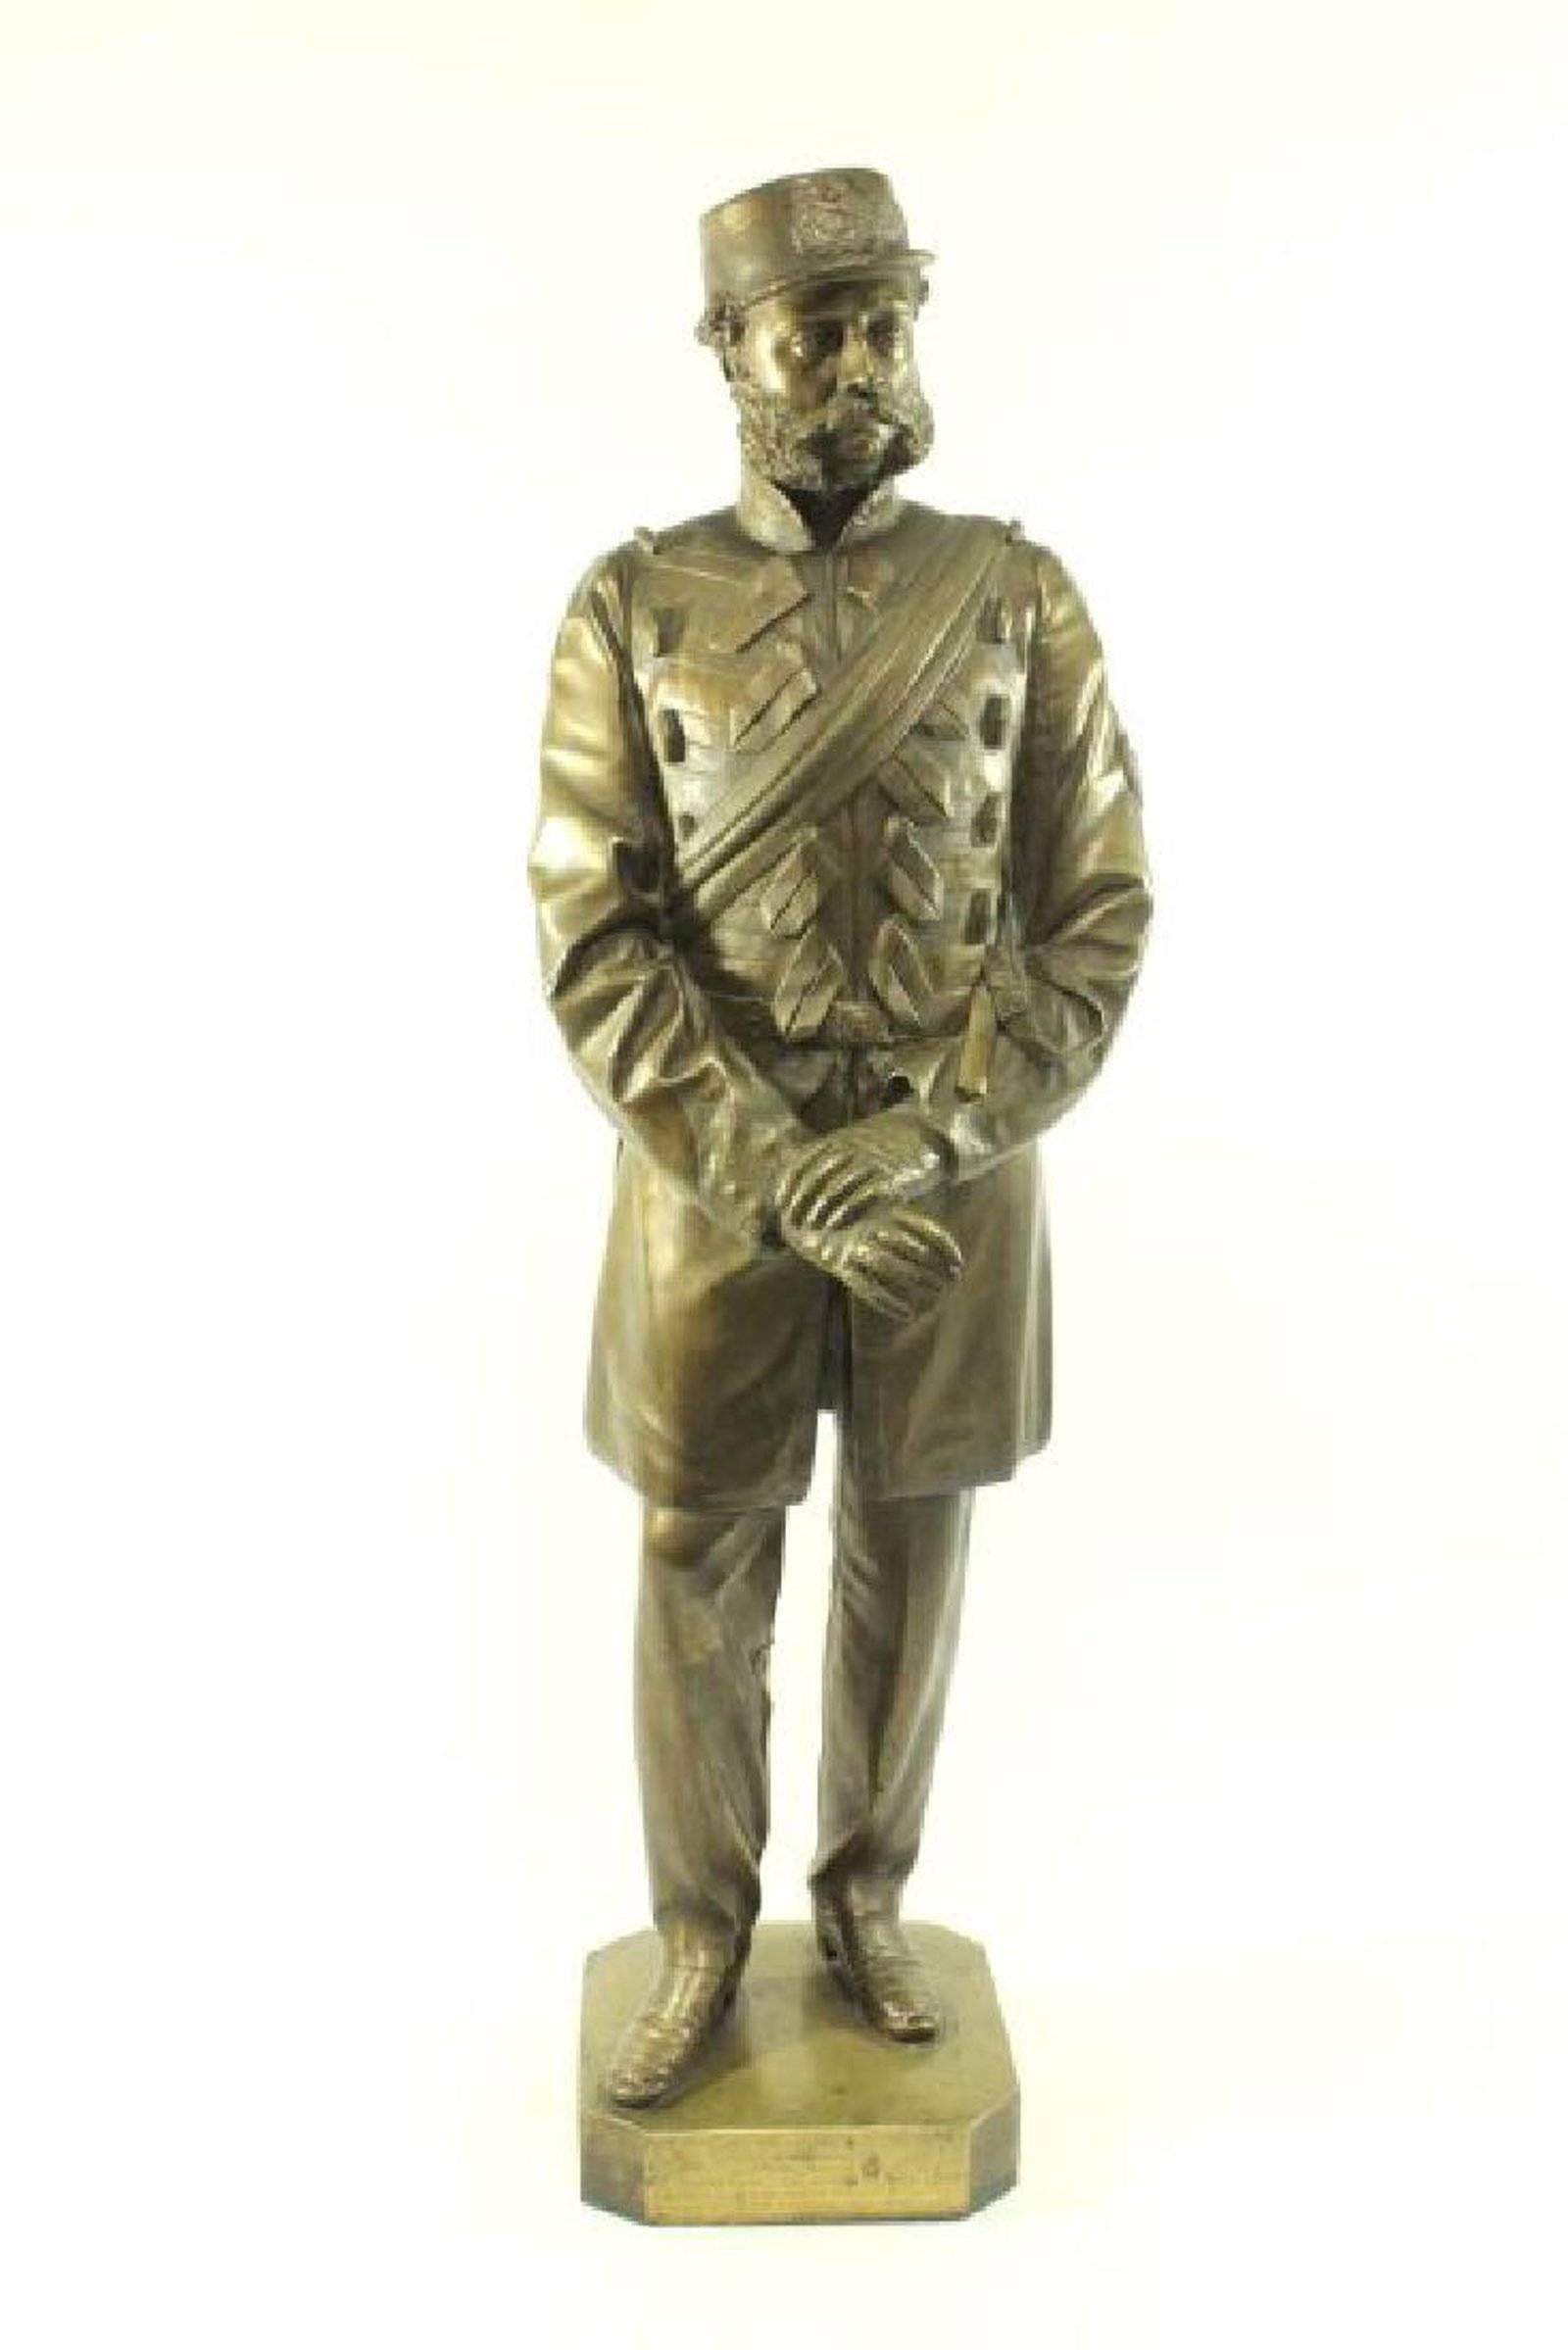 Bronze portrait figure of a British H.A.C. Military officer by T. Fowke, London, 1865
Signed T. Fowke London 1865, inscription on the front 
Presented to Captain John P. Field. H.A.C. (Honourable Artillery Company)
By His Friends
THO.s R.